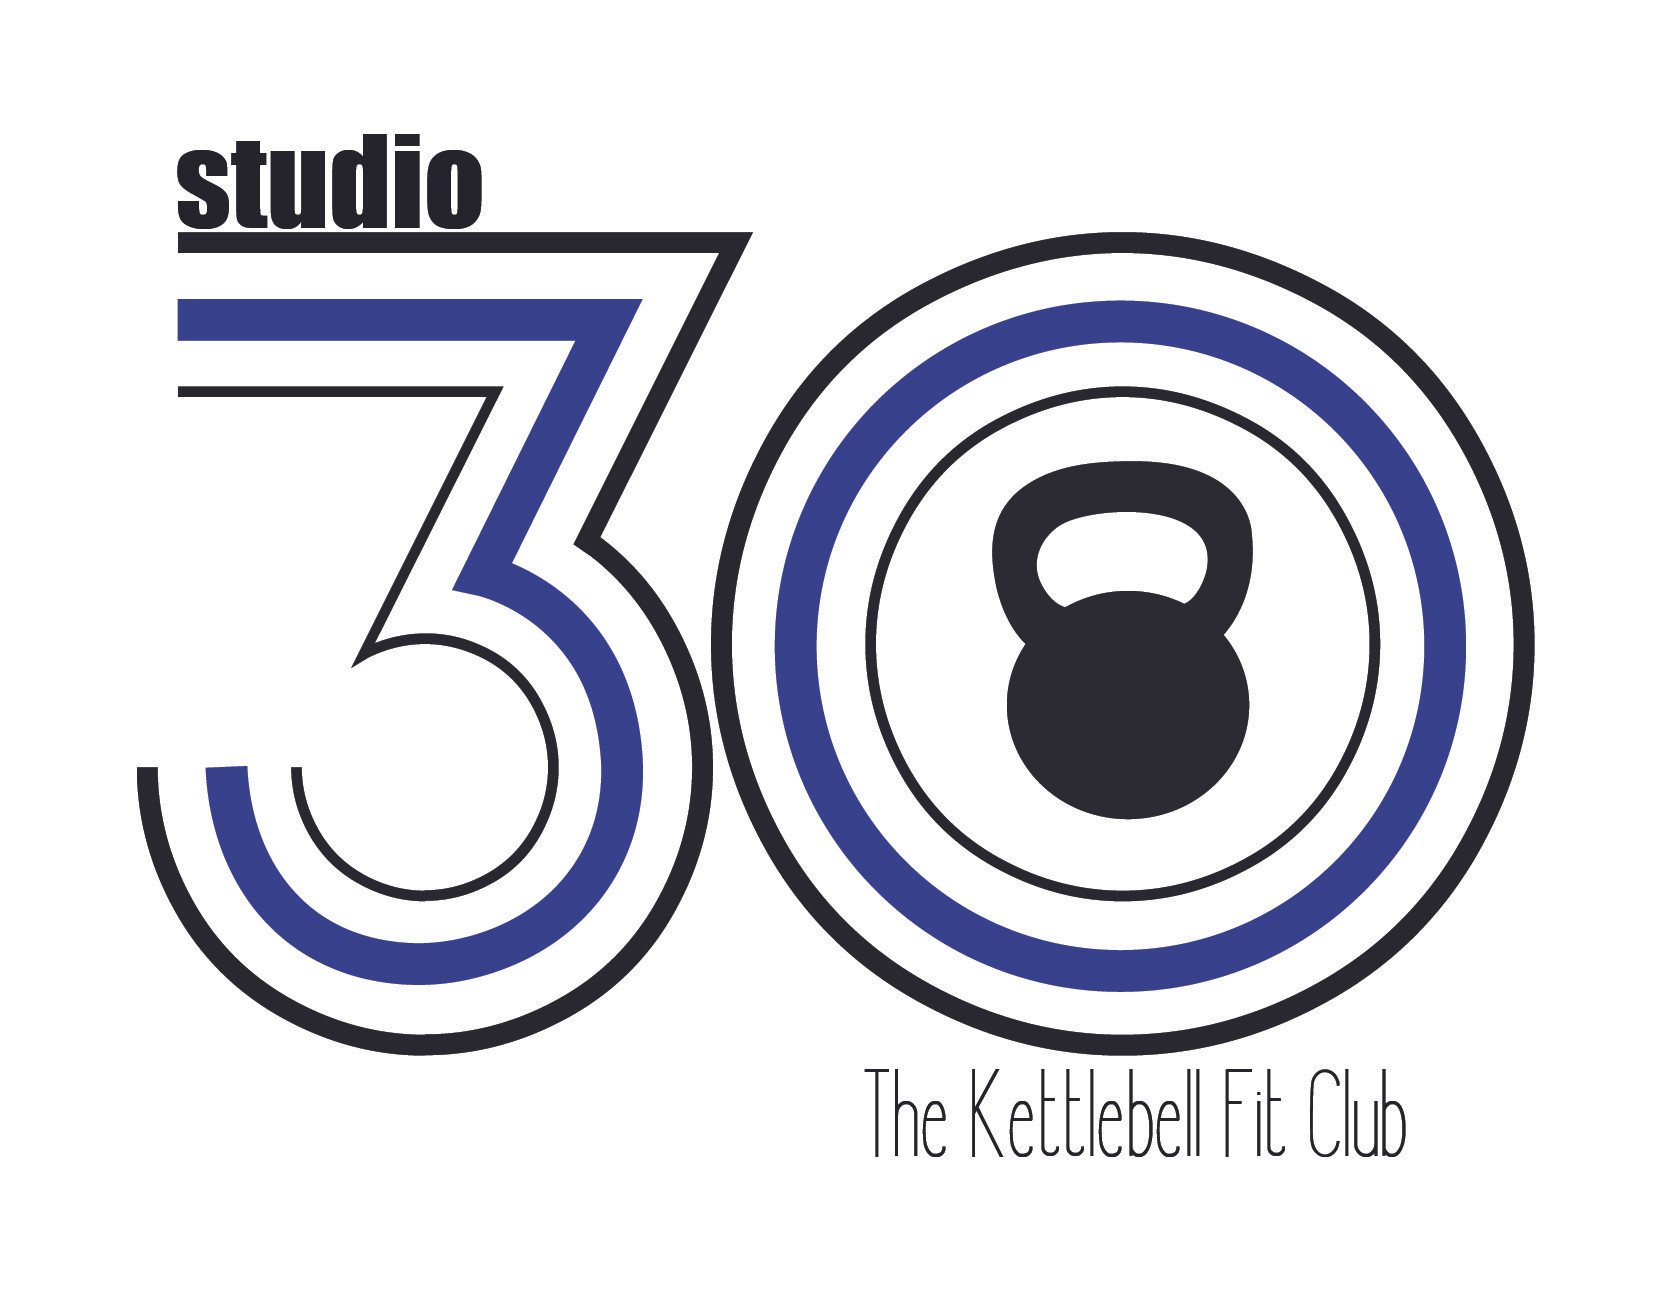 Studio 30 - The Kettlebell Fit Club